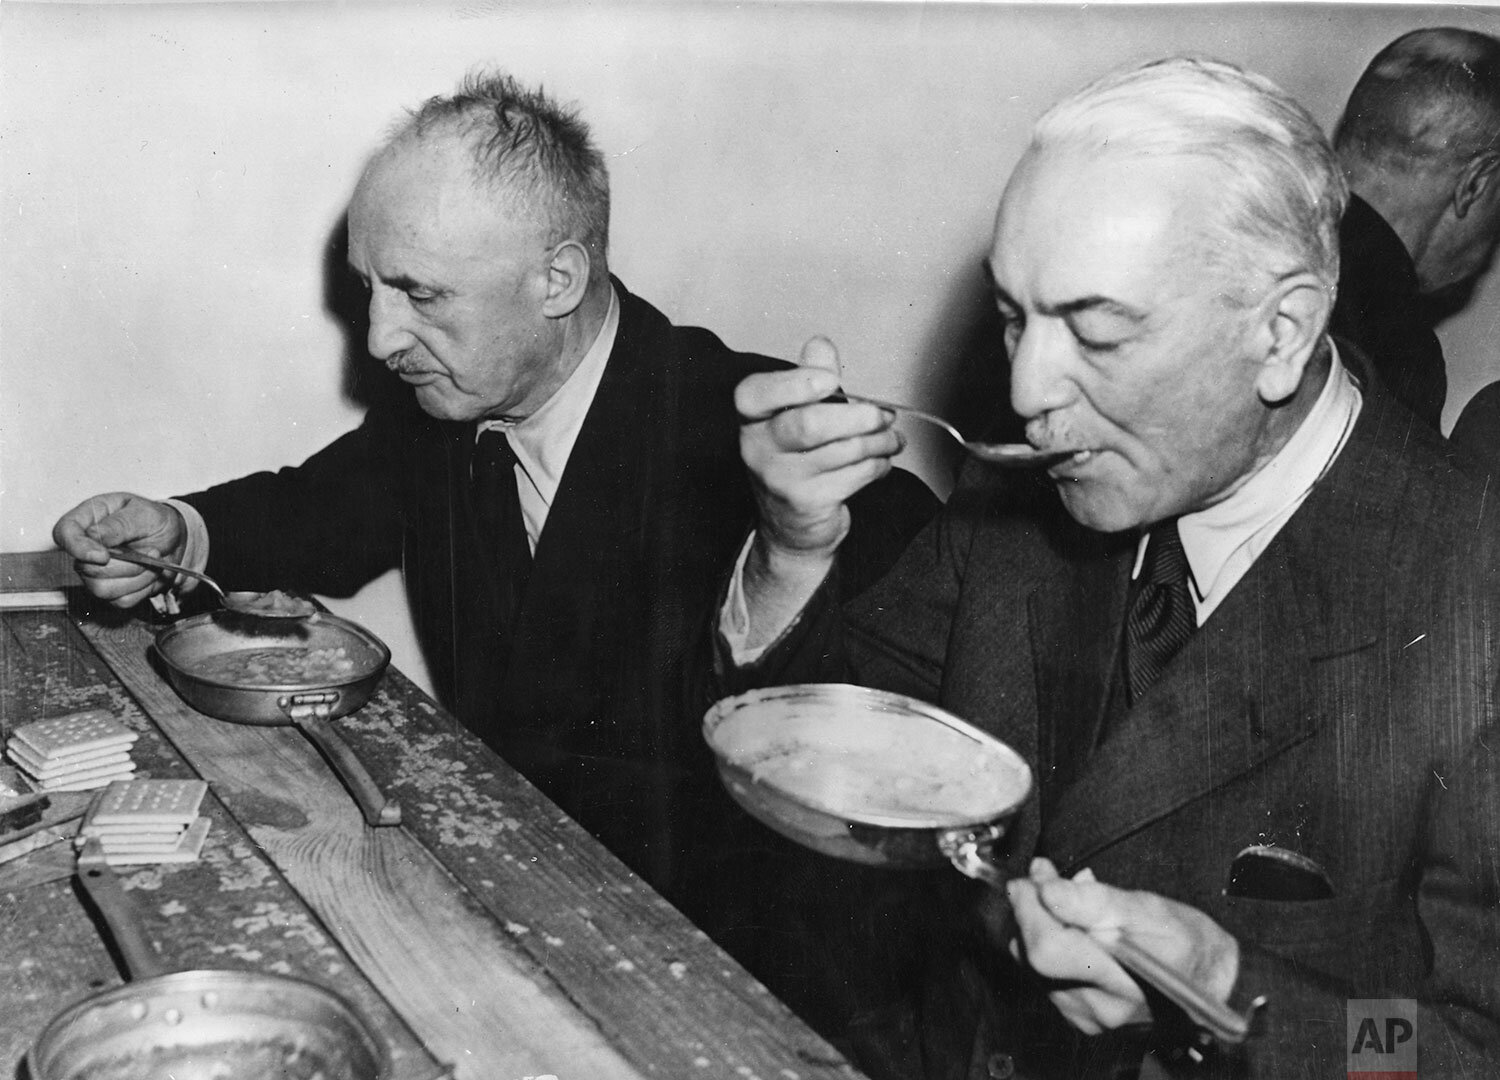  Former Foreign Minister of the German Reich, Dr. Konstantin von Neurath, right, and Julius Streicher eating their lunches from U.S. American Army mess tins on a bare board table, in the Palace of Justice, in Nuremberg, Germany, November 29, 1945. Bo